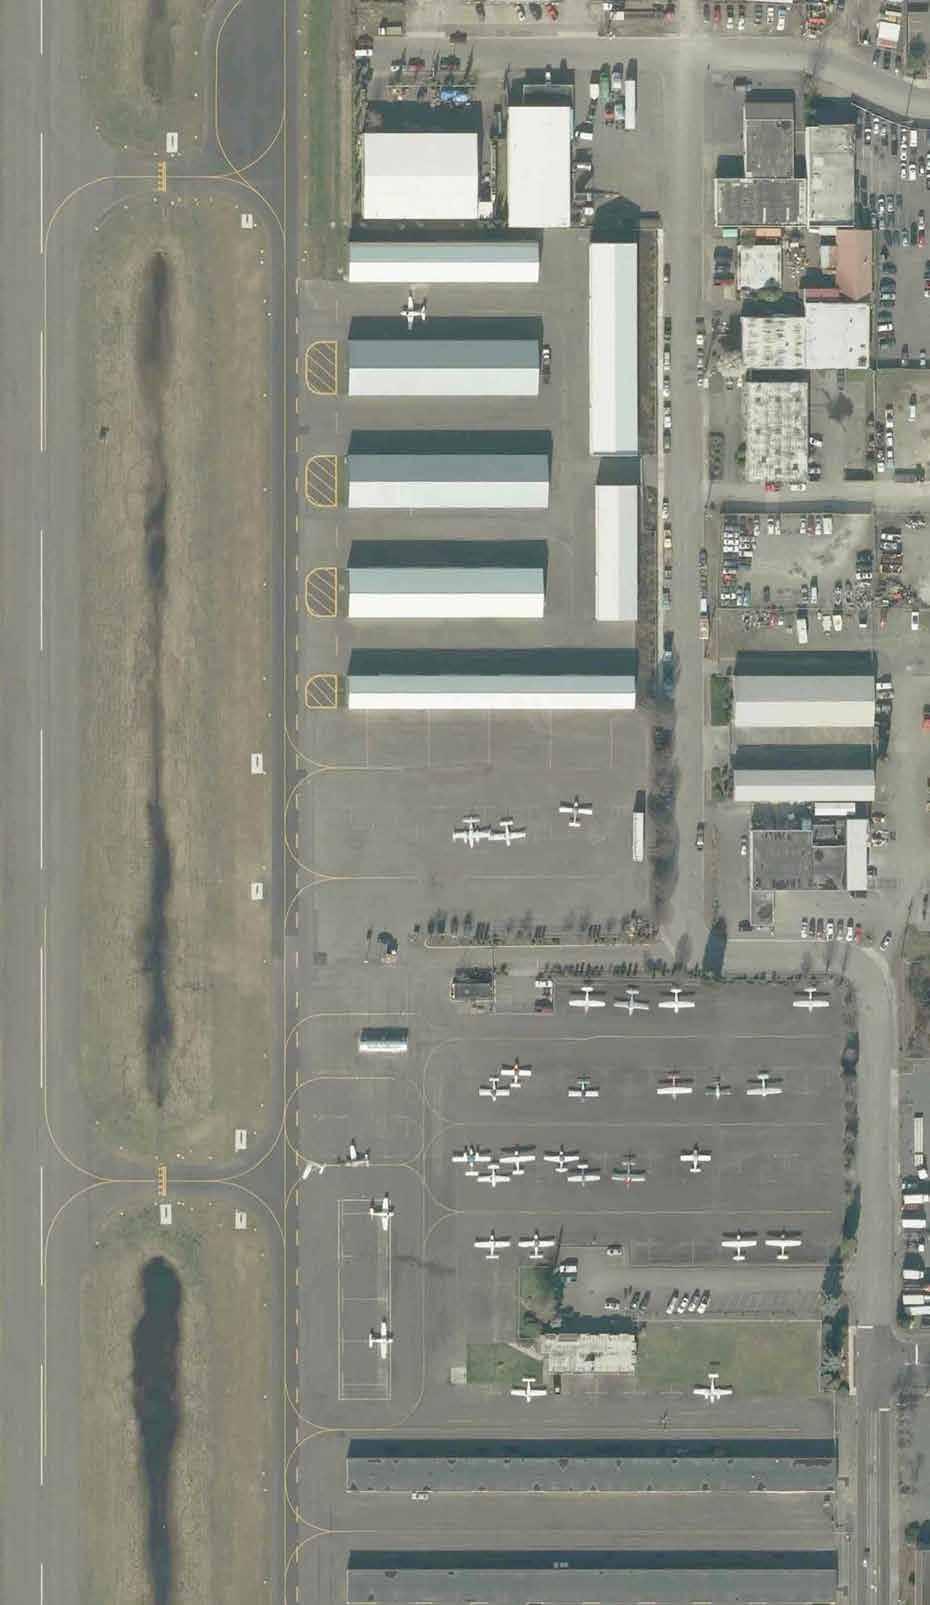 TAXILANE OFA (HANGARS) TAXILANE OFA (PARKED AC) TAXILANE OFA (PARKED VEHICLES) * NE E STREET TAXILANE (AC FUEL ISLAND) * TAXILANE/TAXIWAY OBJECT FREE AREA PARKED VEHICLES OBSERVED IN VARIOUS HANGAR